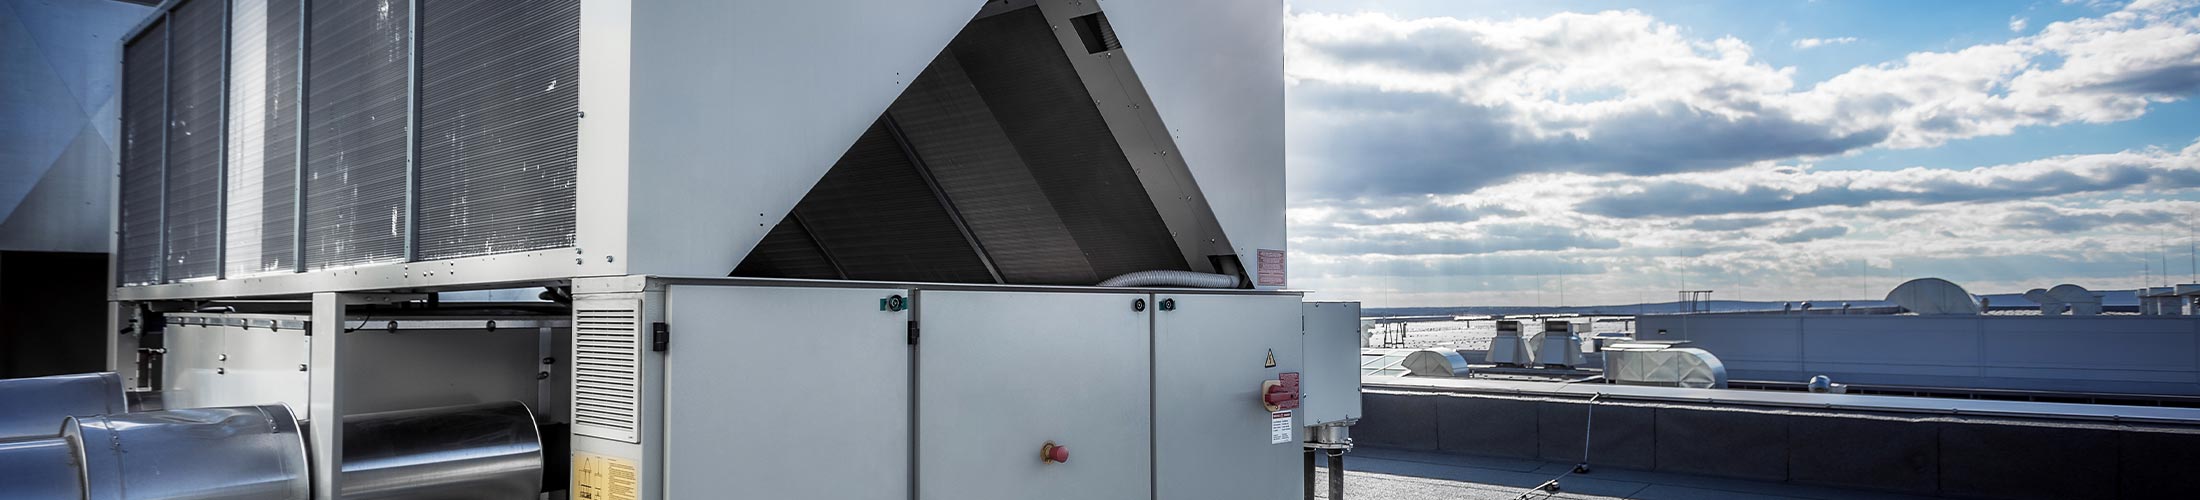 image of commercial air conditioning unit on top of a building